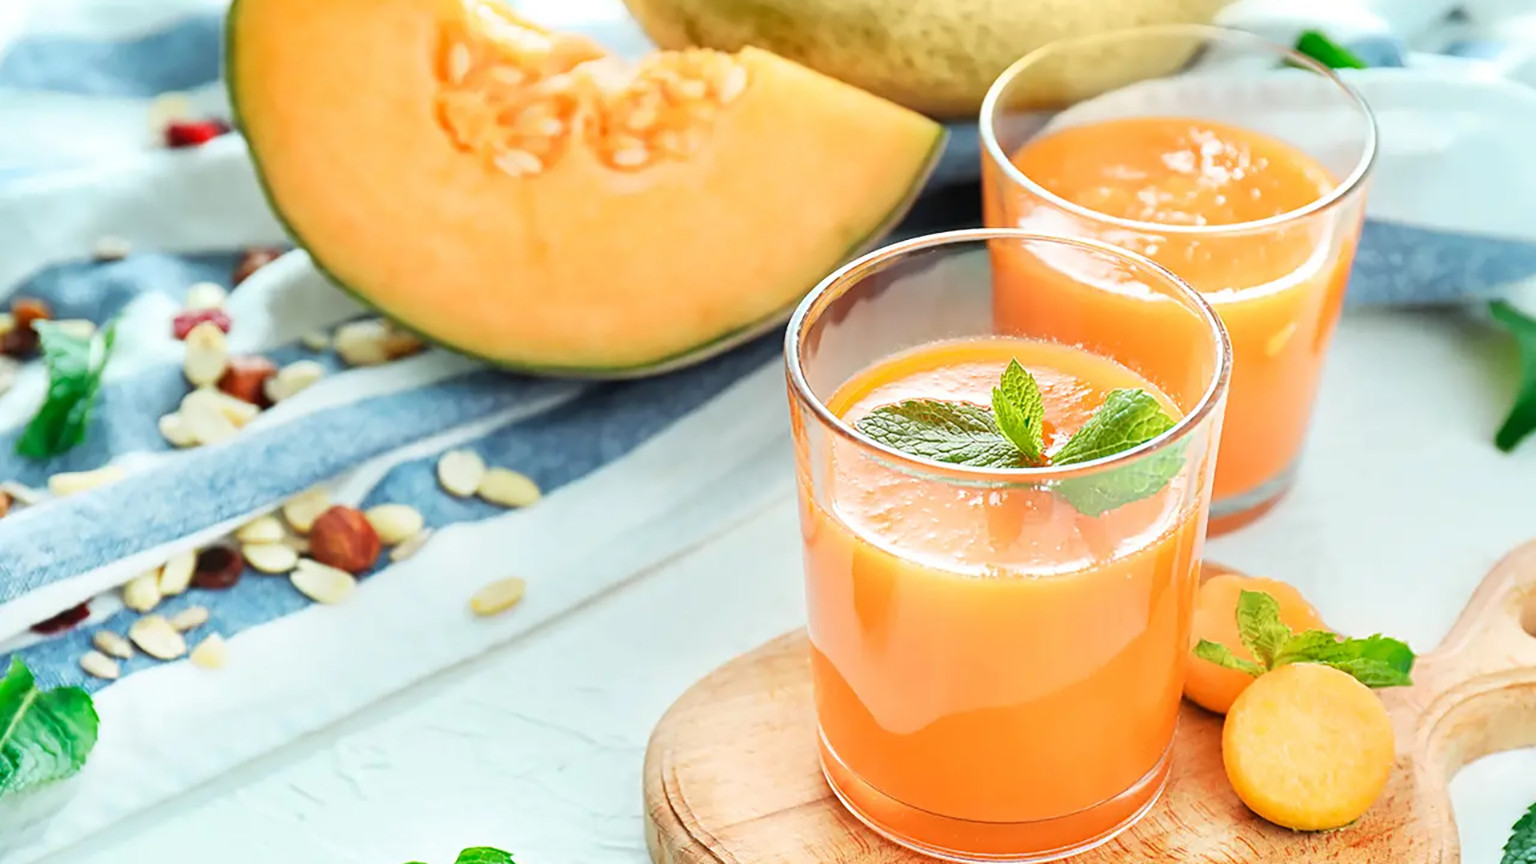 Melon juice: one of the choices for summertime